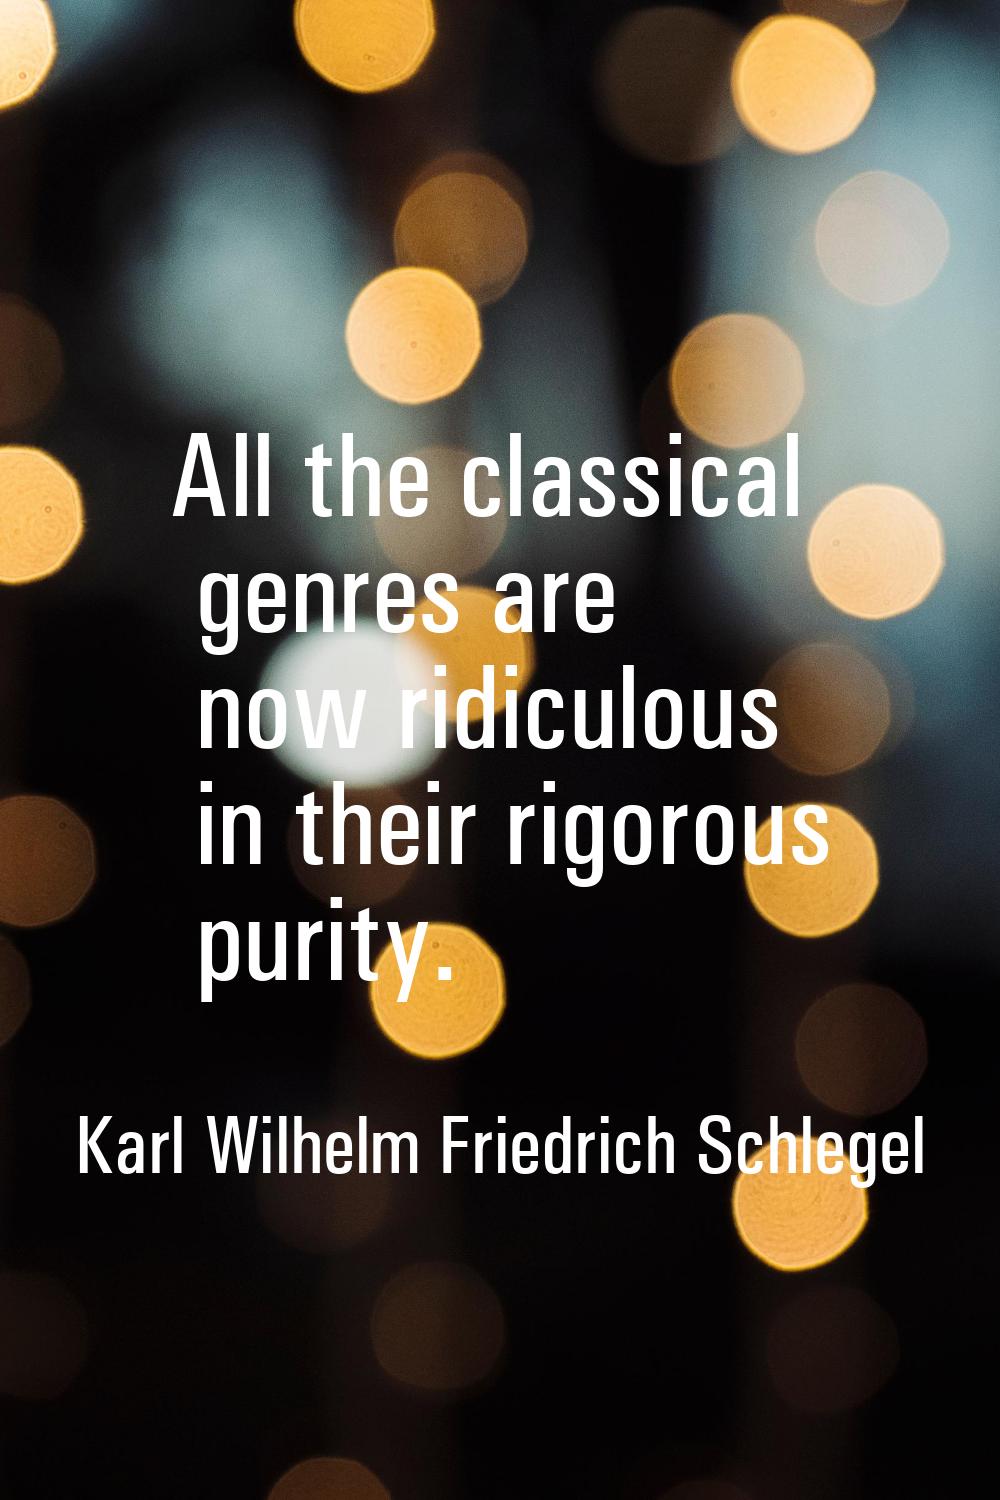 All the classical genres are now ridiculous in their rigorous purity.